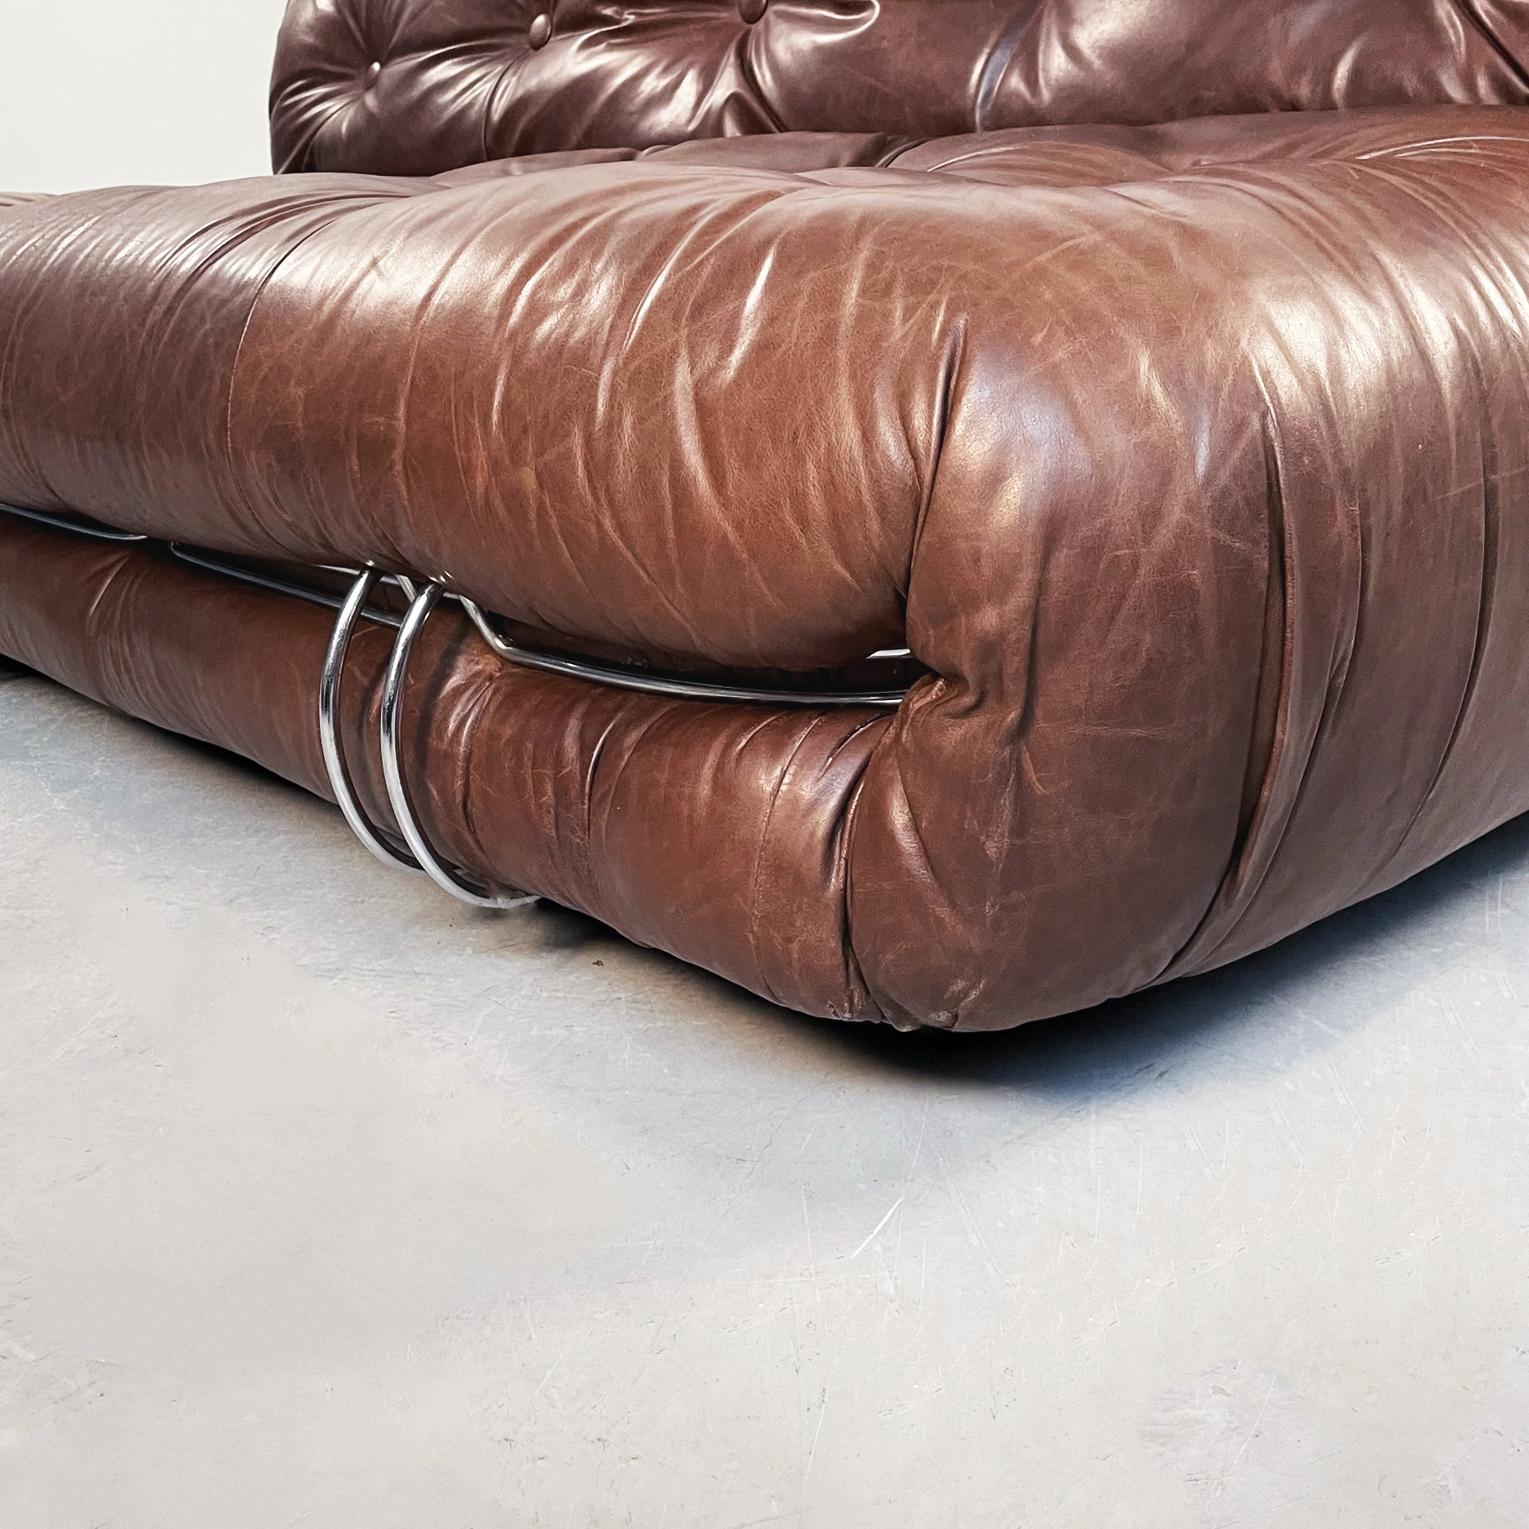 Italian MidCentury Brown Leather Soriana Sofa by Afra Tobia Scarpa Cassina, 1970 For Sale 4